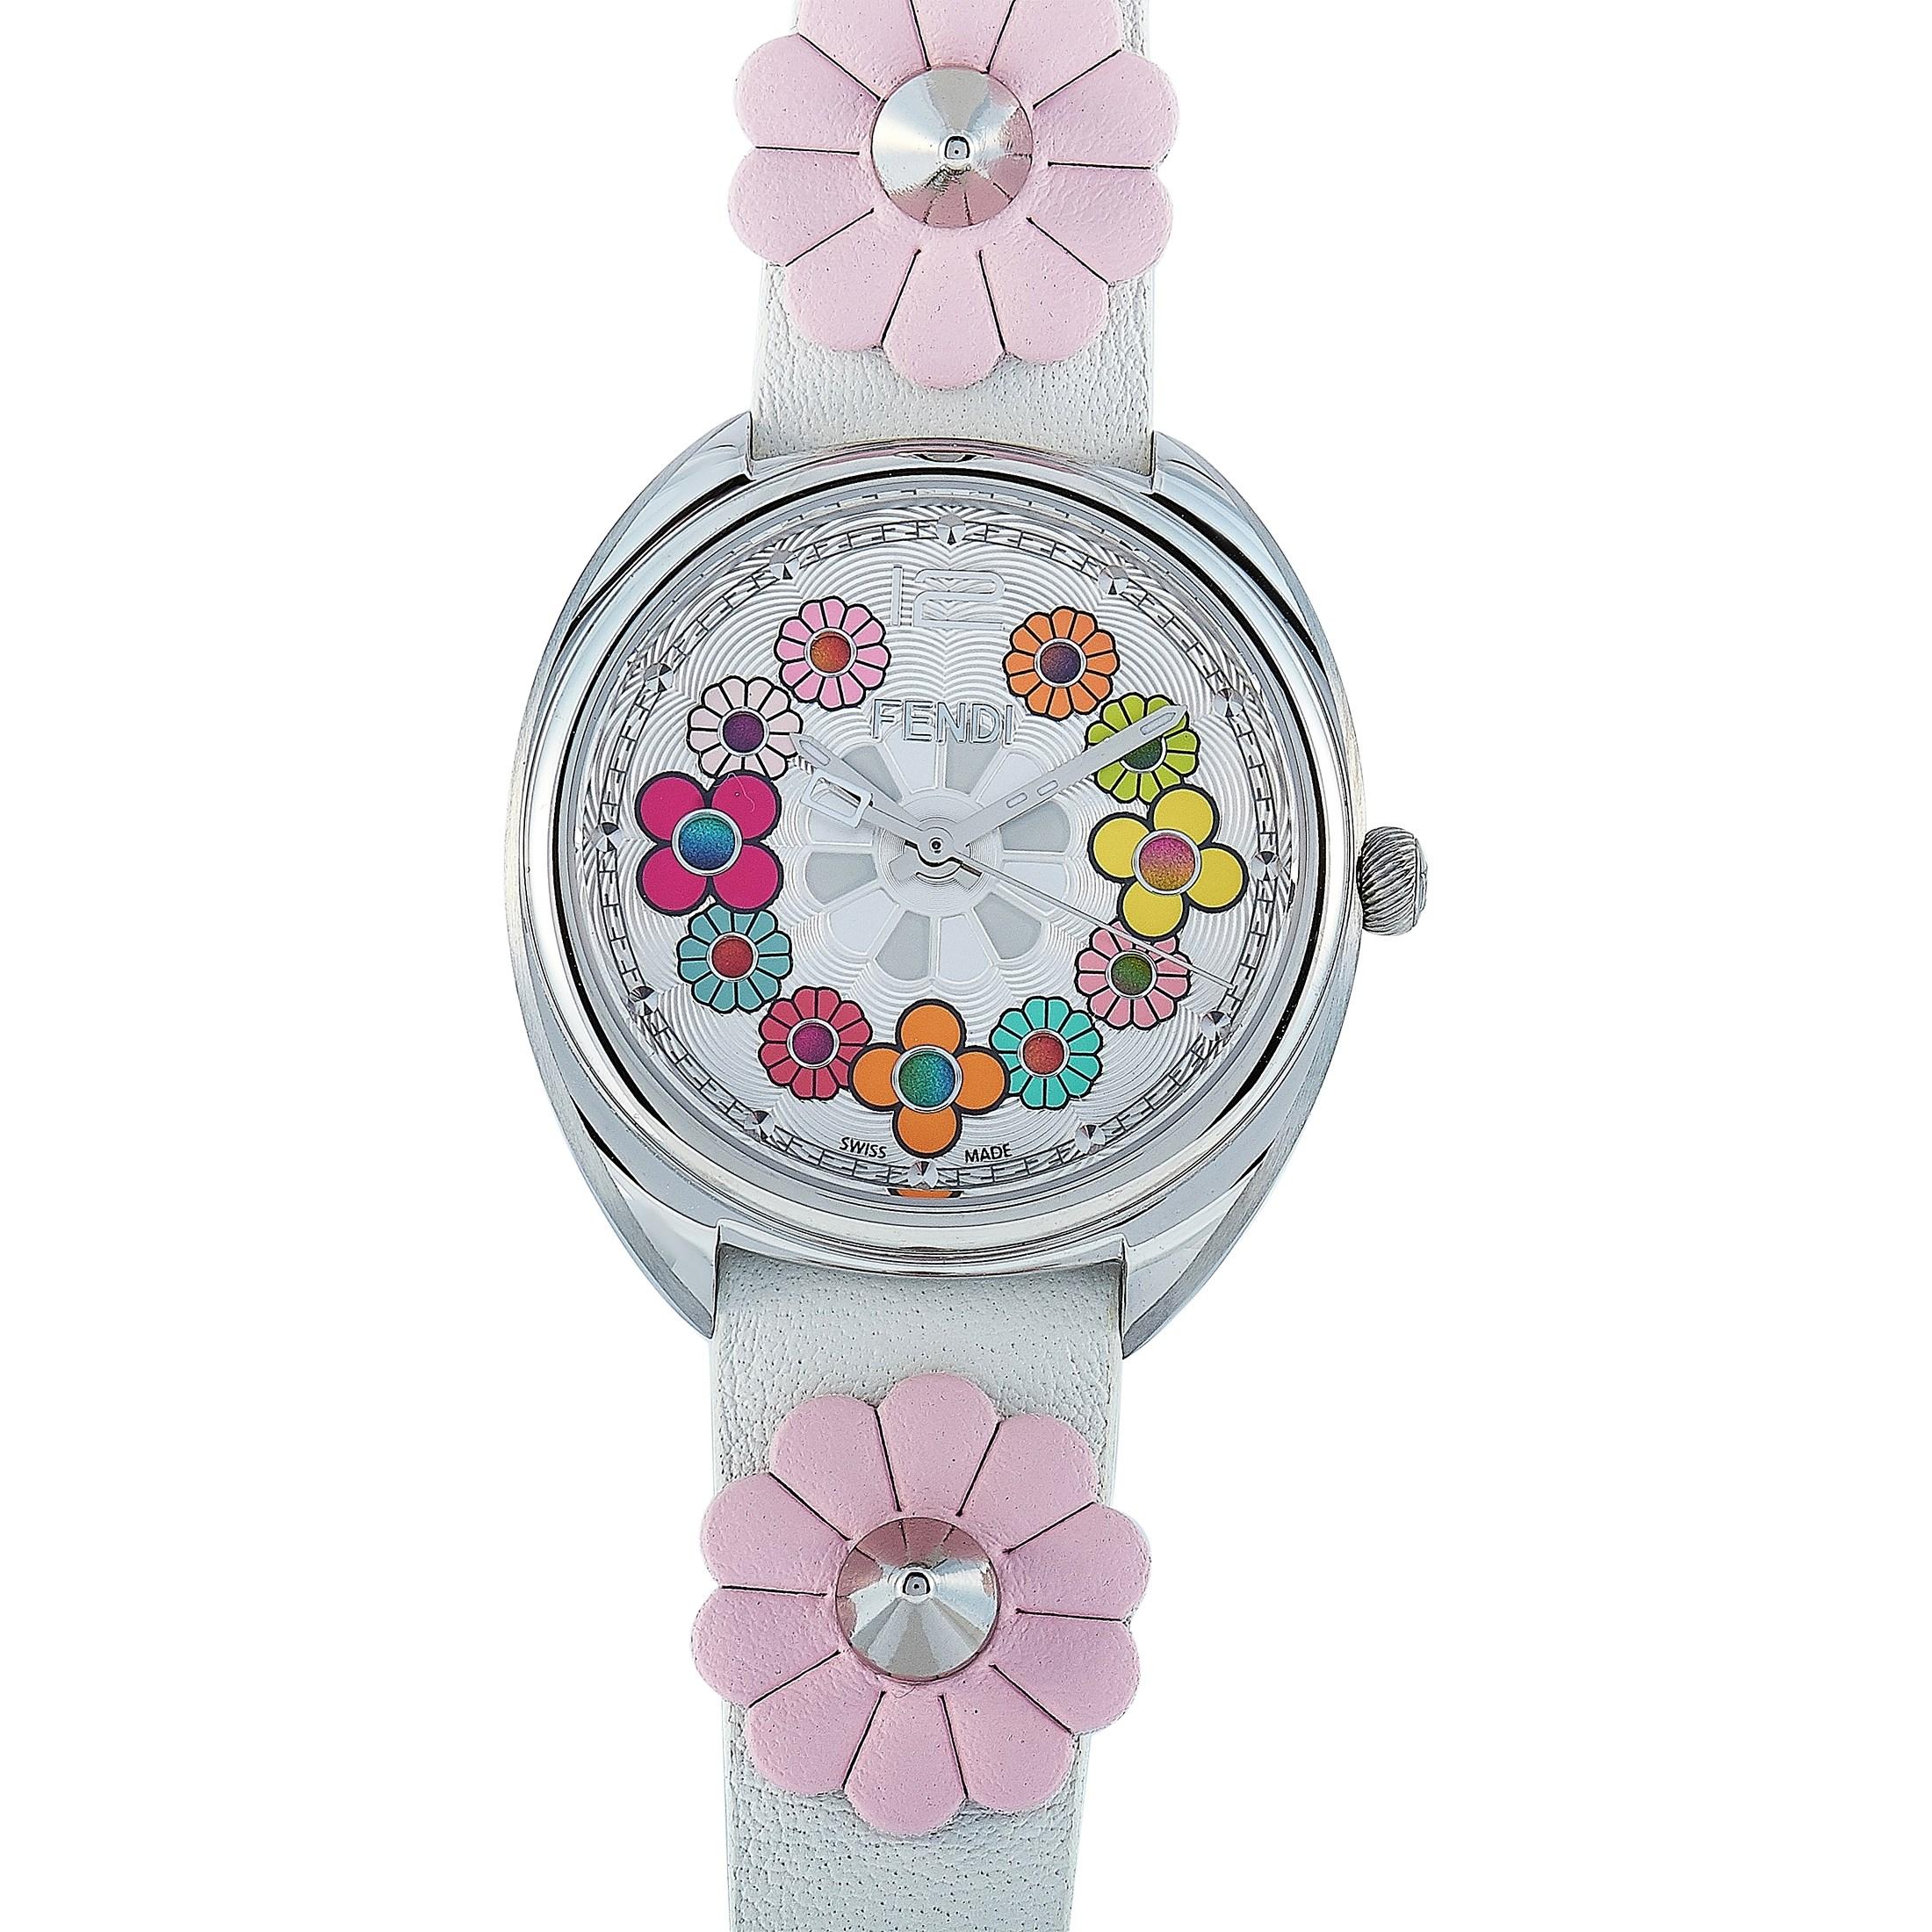 This is the Fendi Momento watch, reference number F234034041.

It is presented with a 34 mm stainless steel case that offers water resistance of 100 meters. The watch is worn on a white leather strap decorated with pink flowers and fitted with a